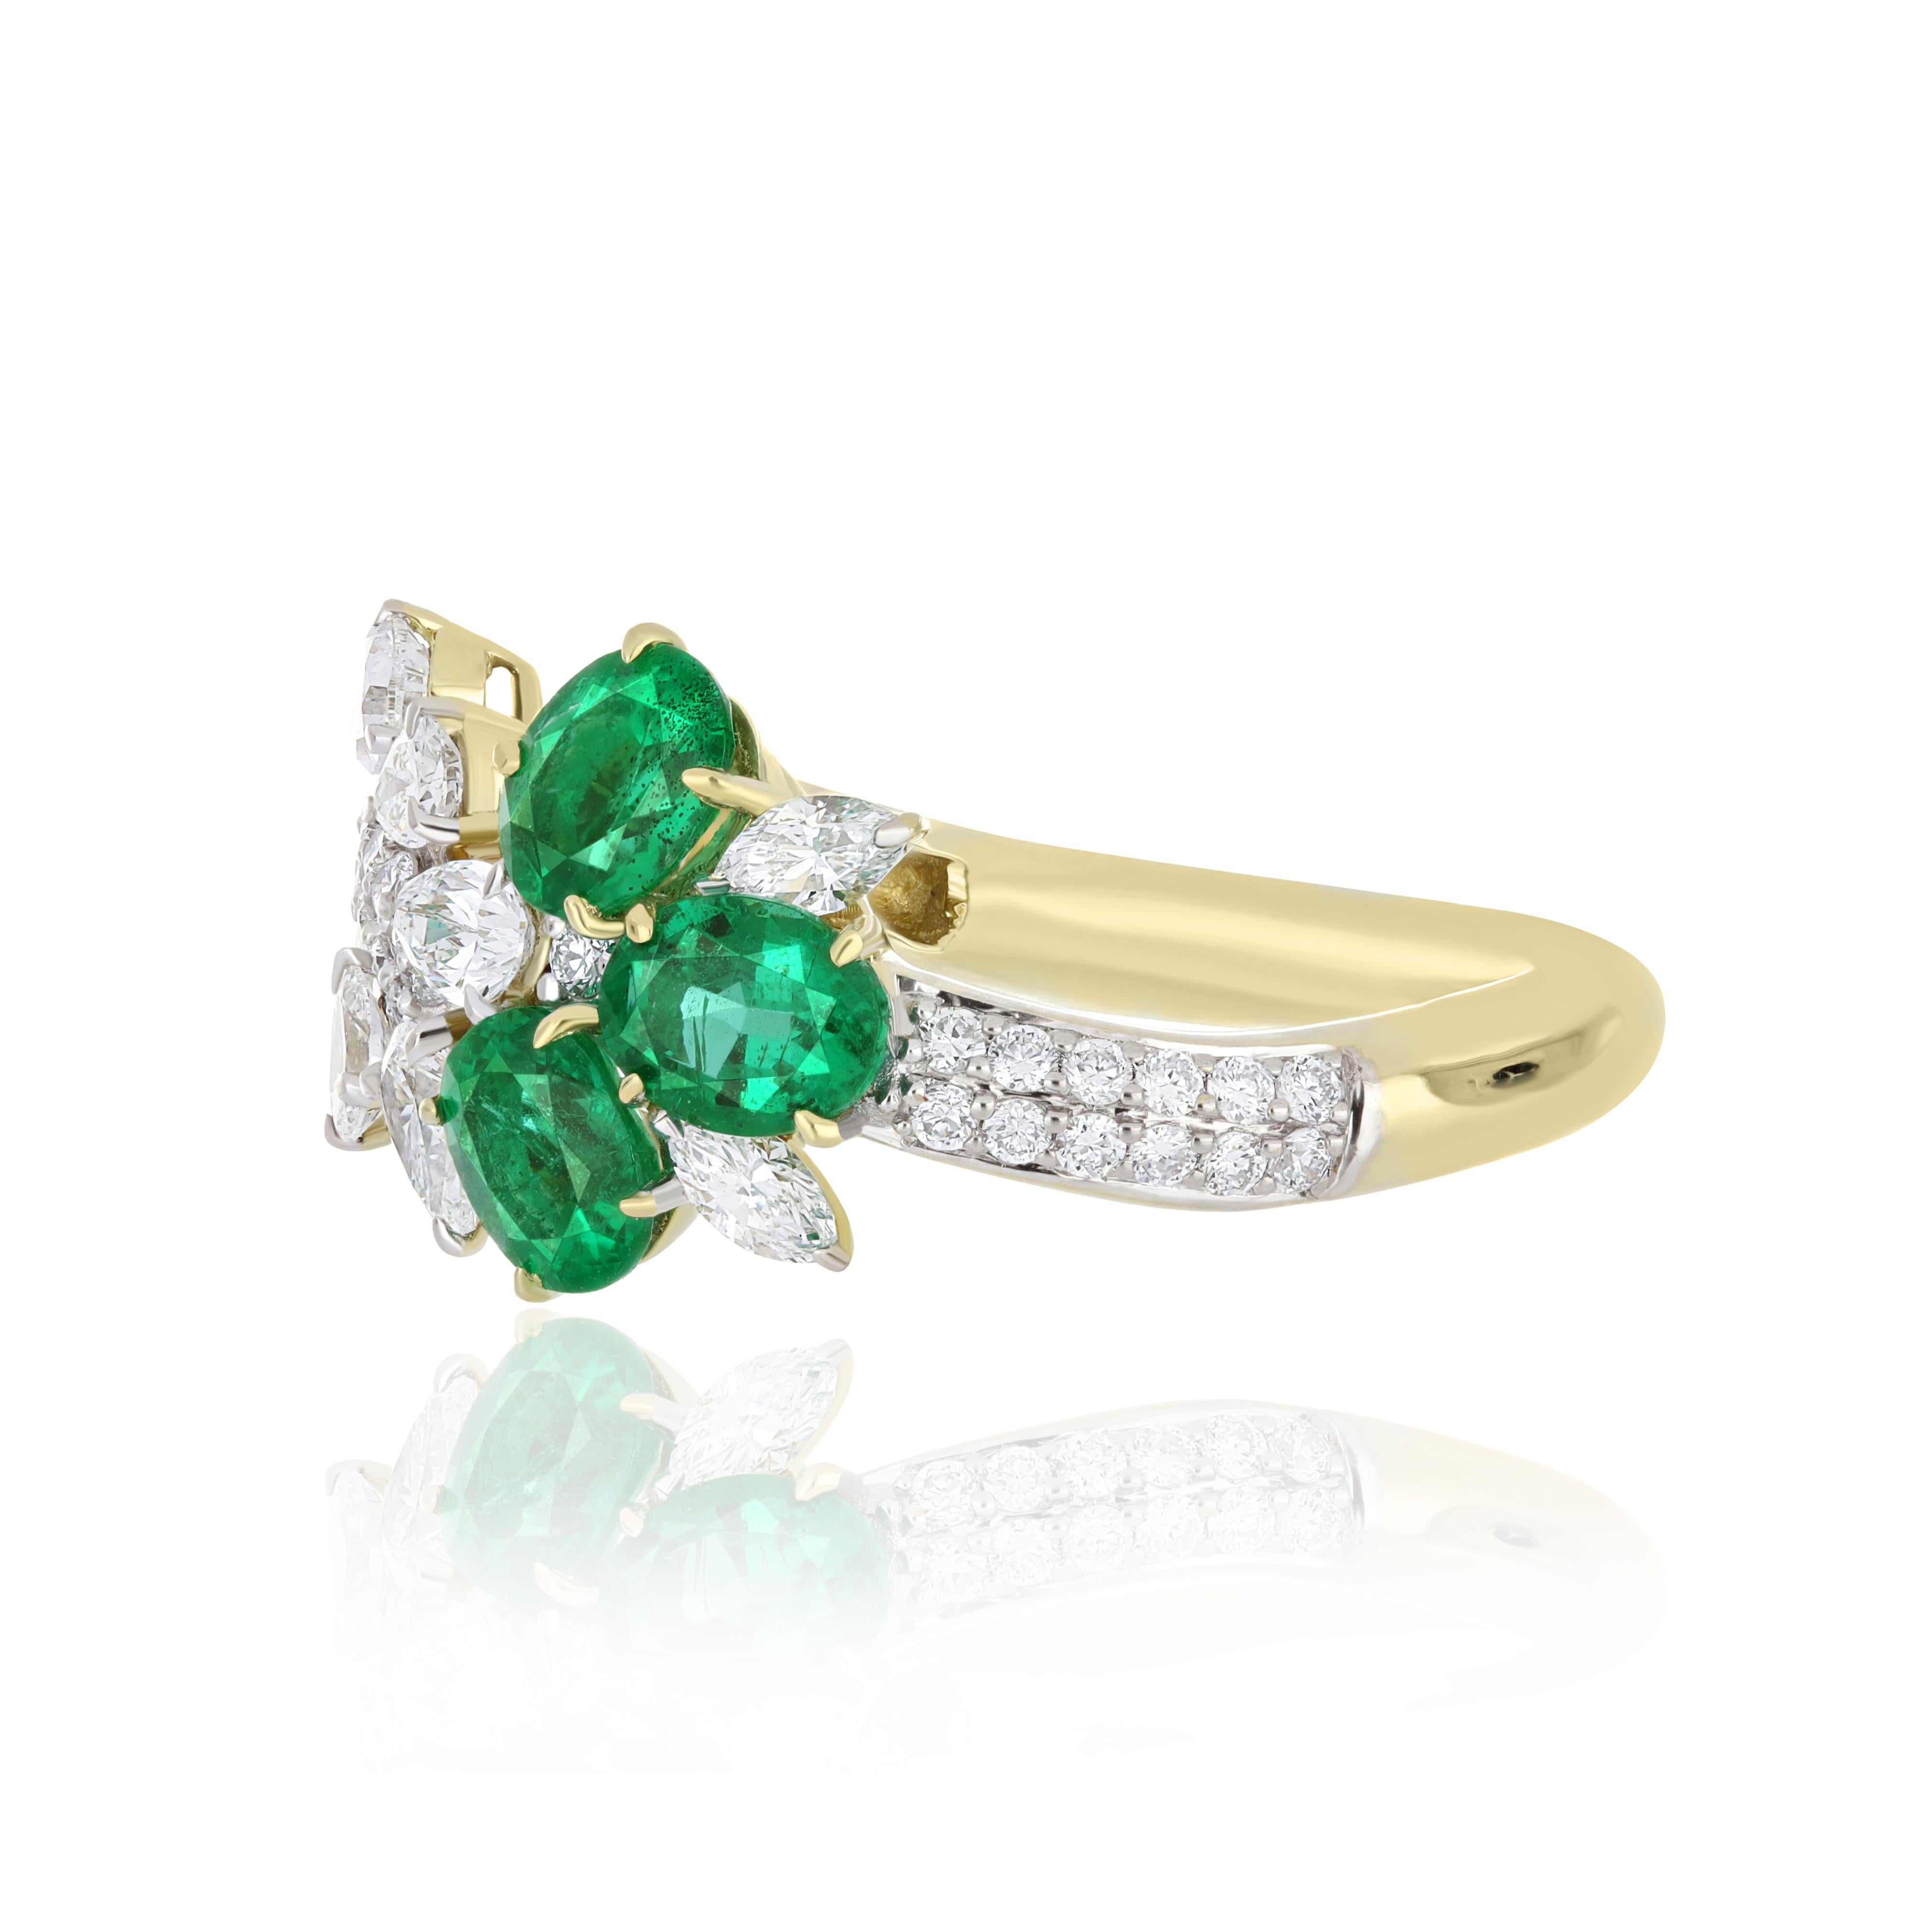 For Sale:  Emerald And Diamond Ring 18K White Gold handcraft Jewelry For Anniversary Gift 4